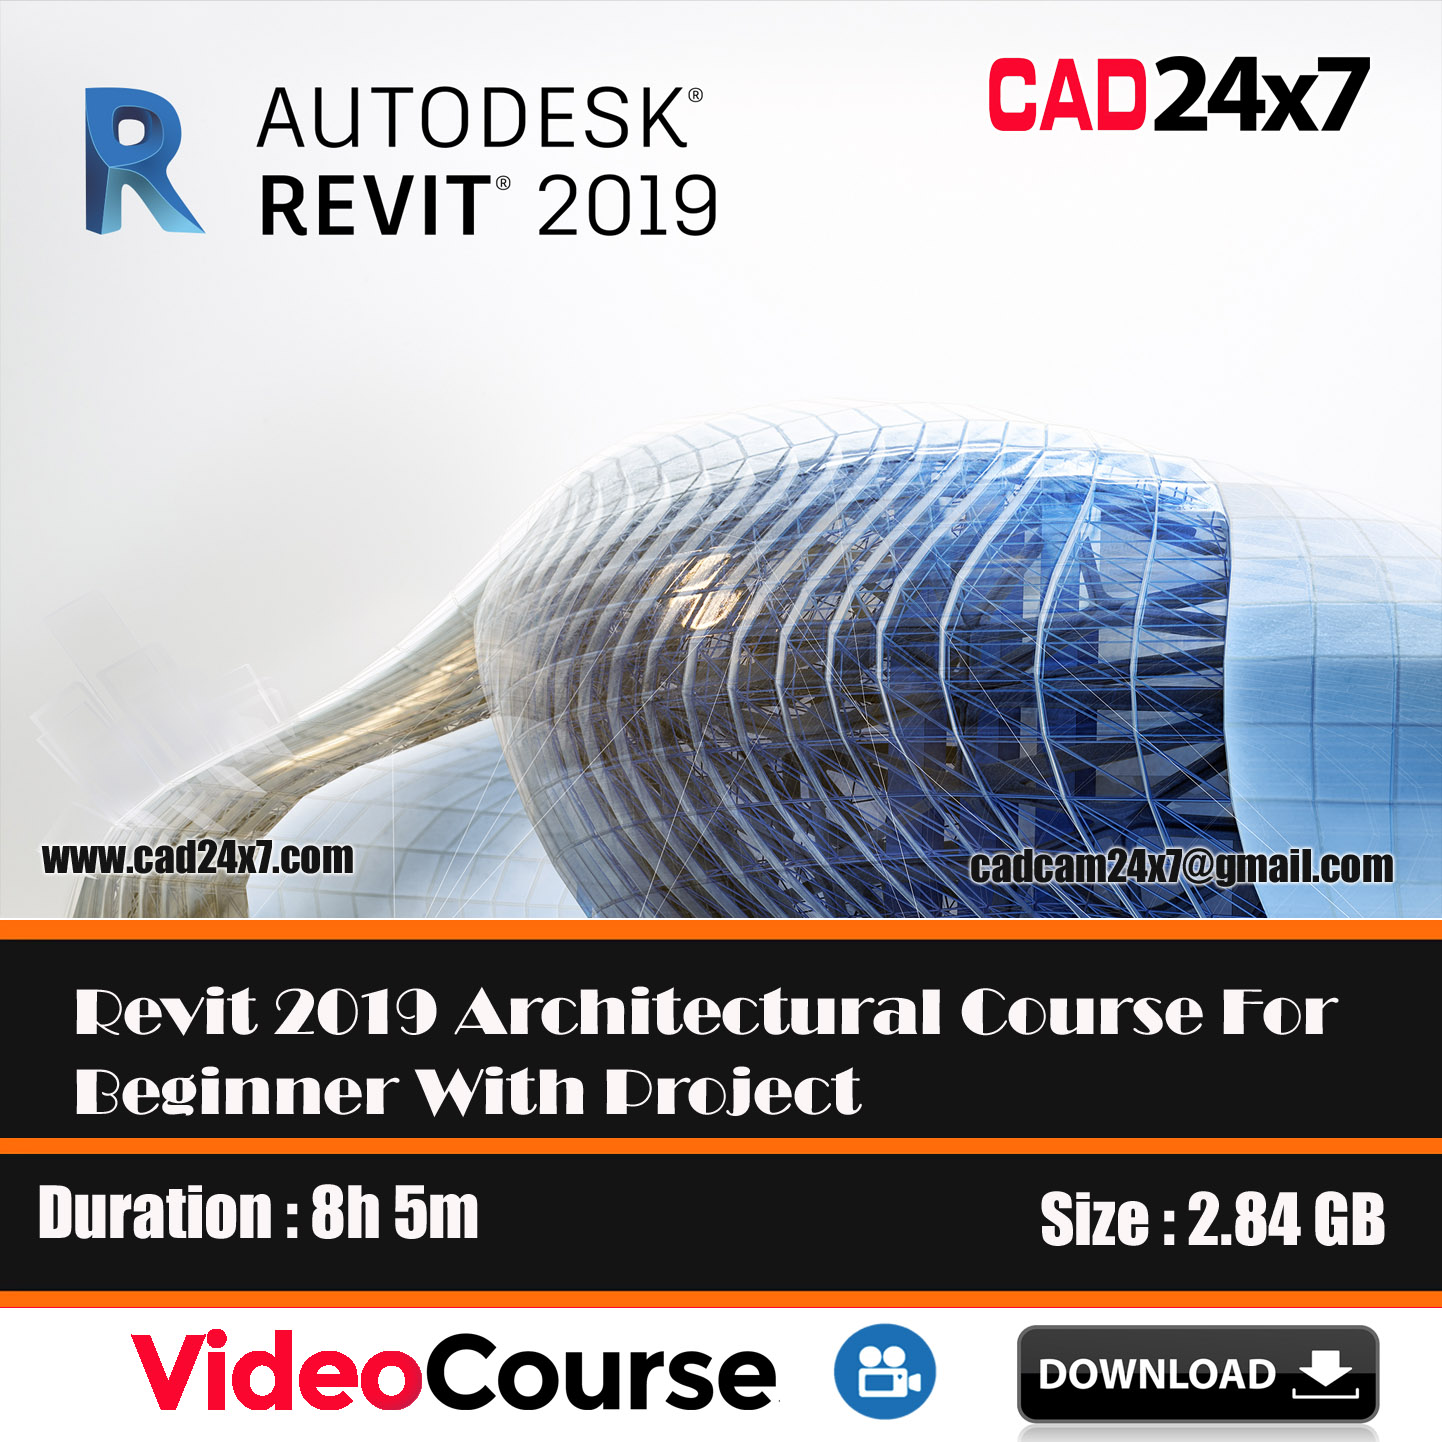 Revit 2019 Architectural Course For Beginner With Project Video Course DOWNLOAD